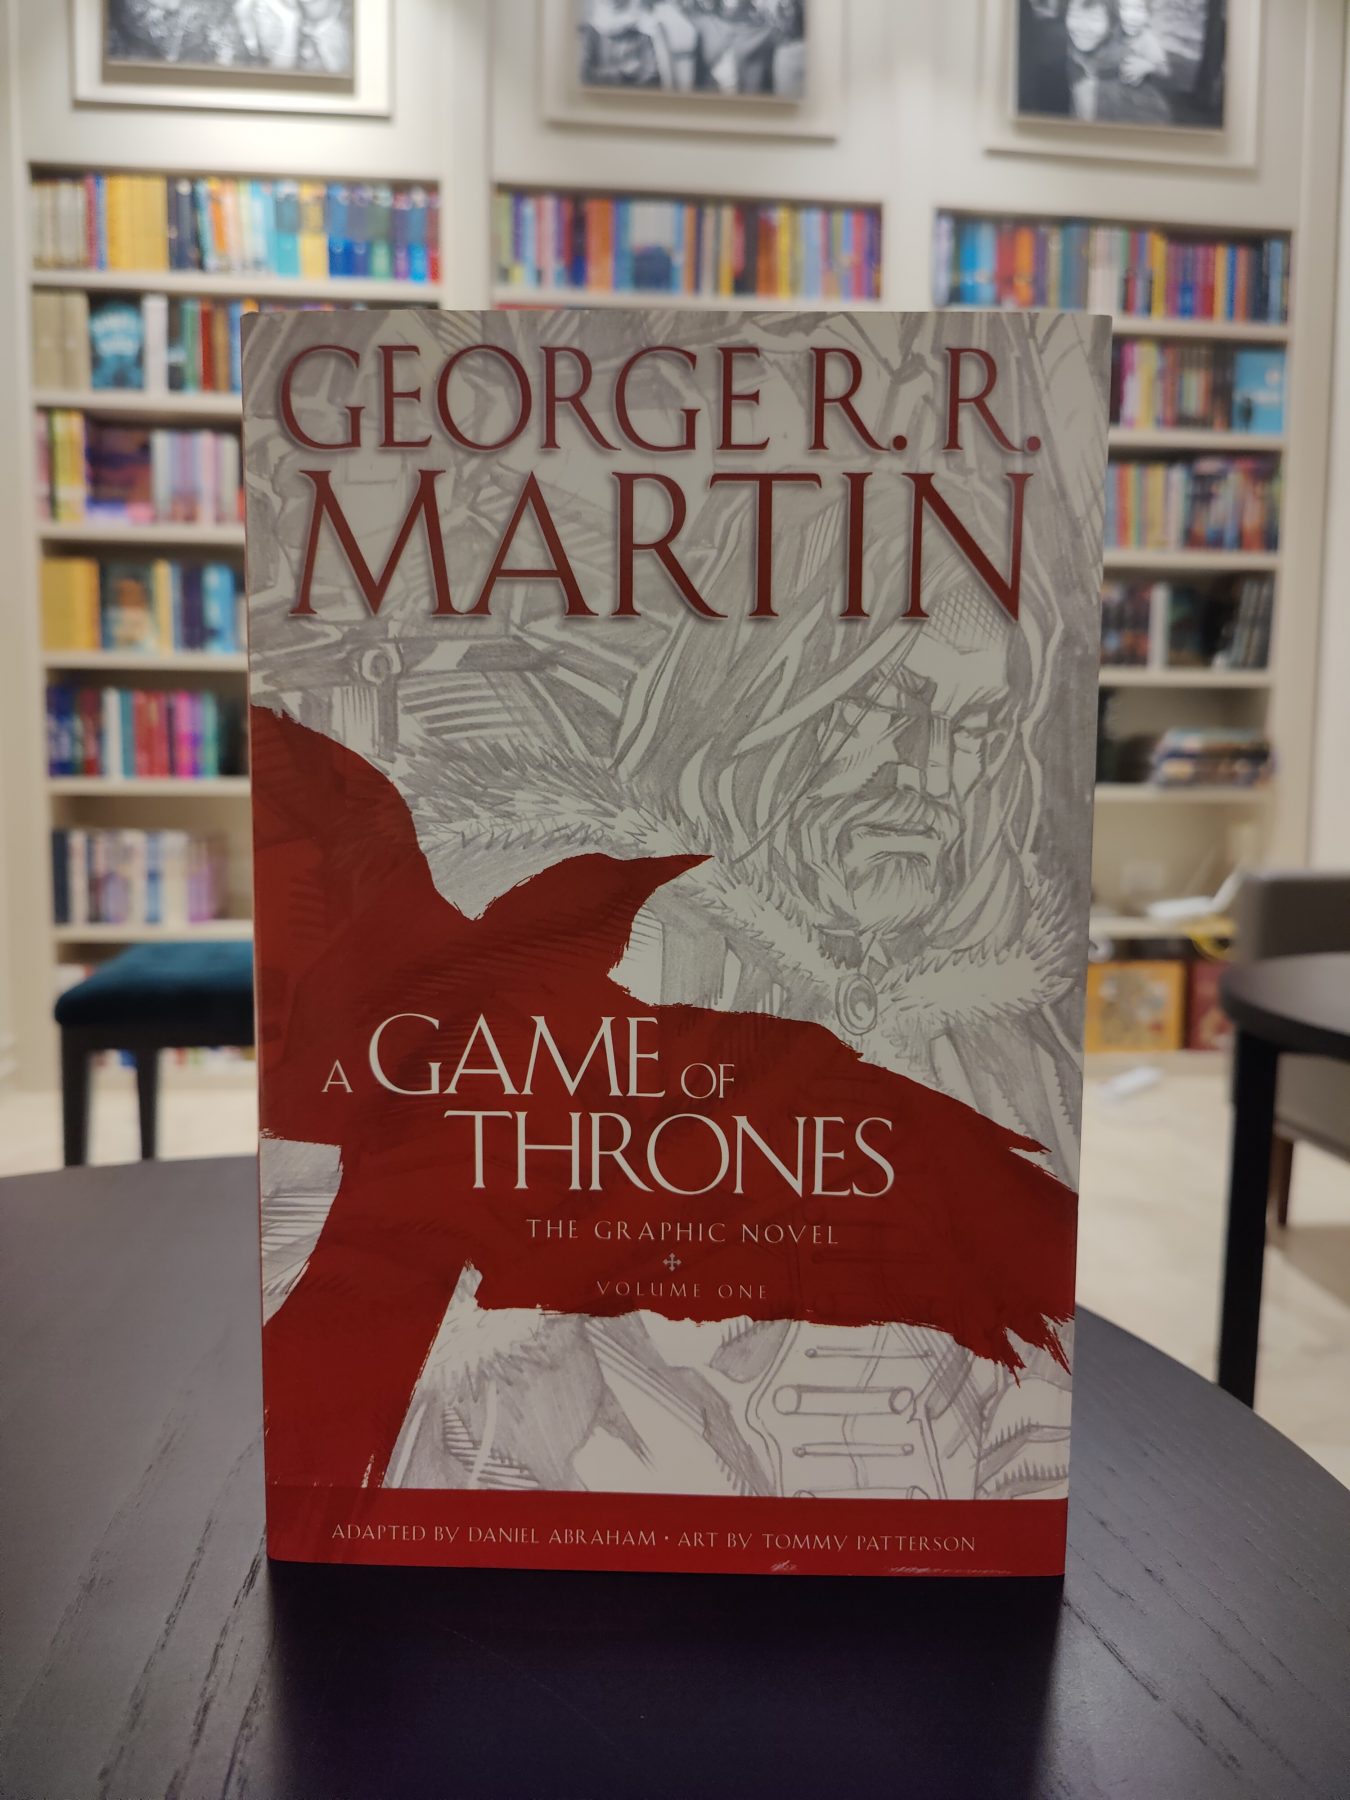 George R.R. Martin’s A Game of Thrones, adapted by Daniel Abraham and art by Tommy Patterson